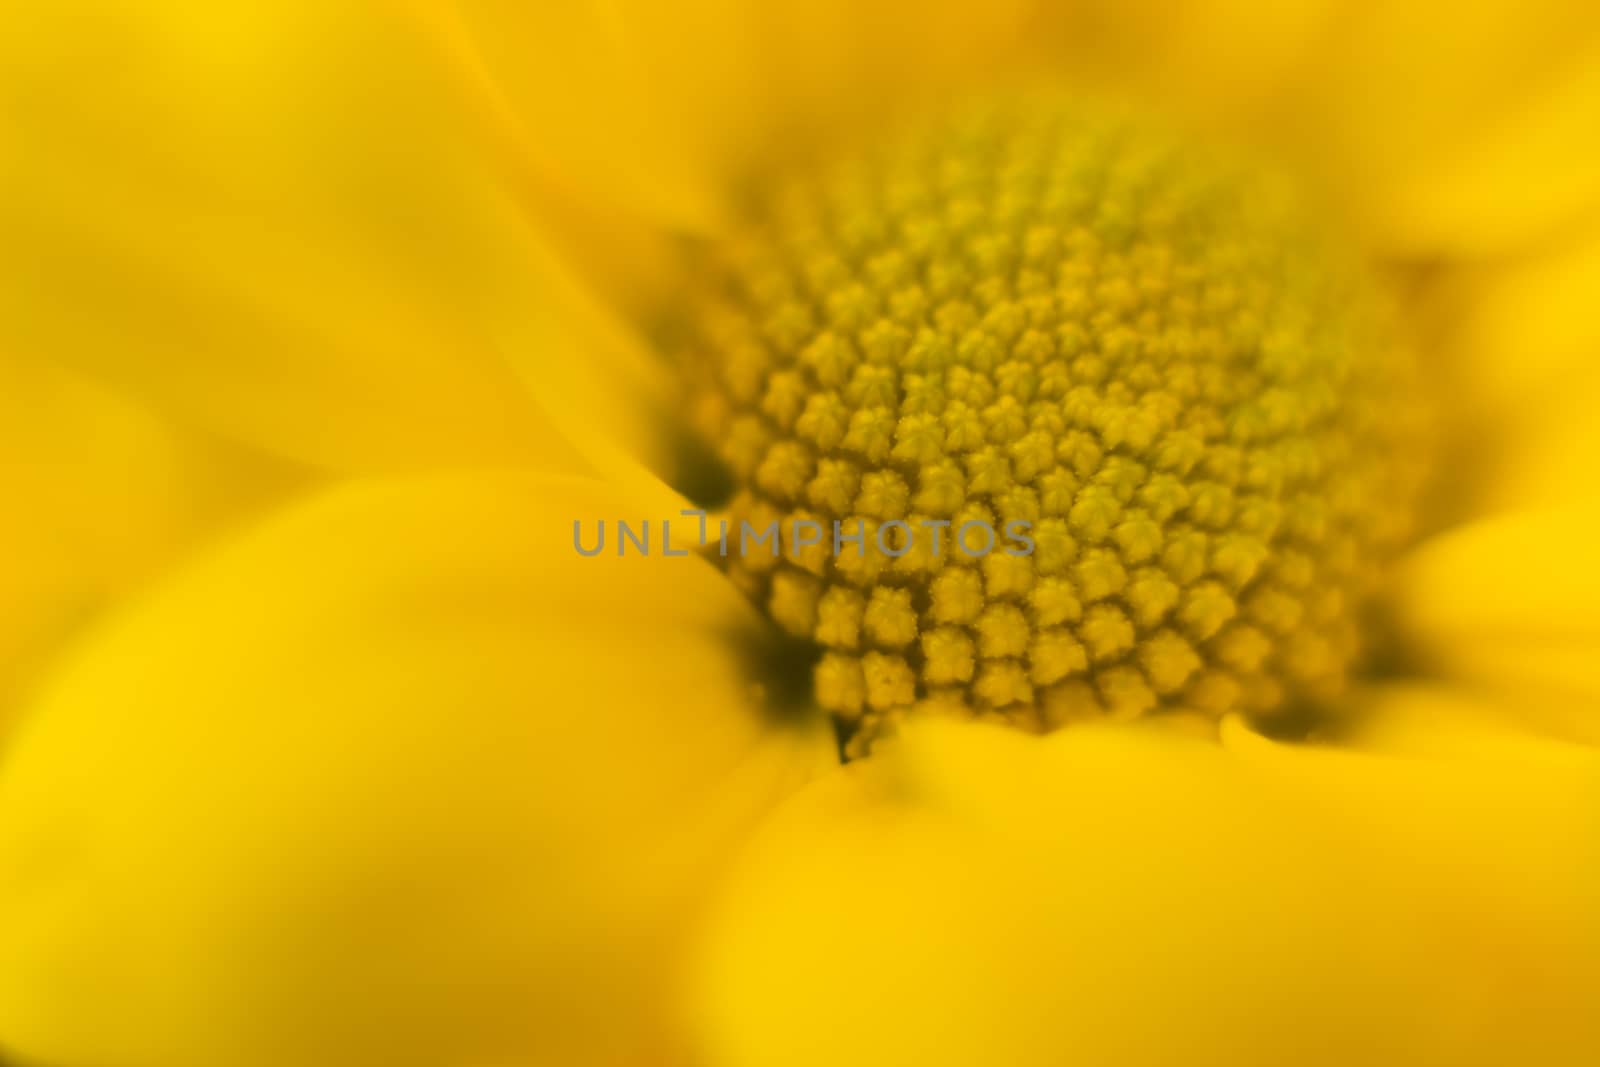 Simple yellow flower closeup with blurred petals